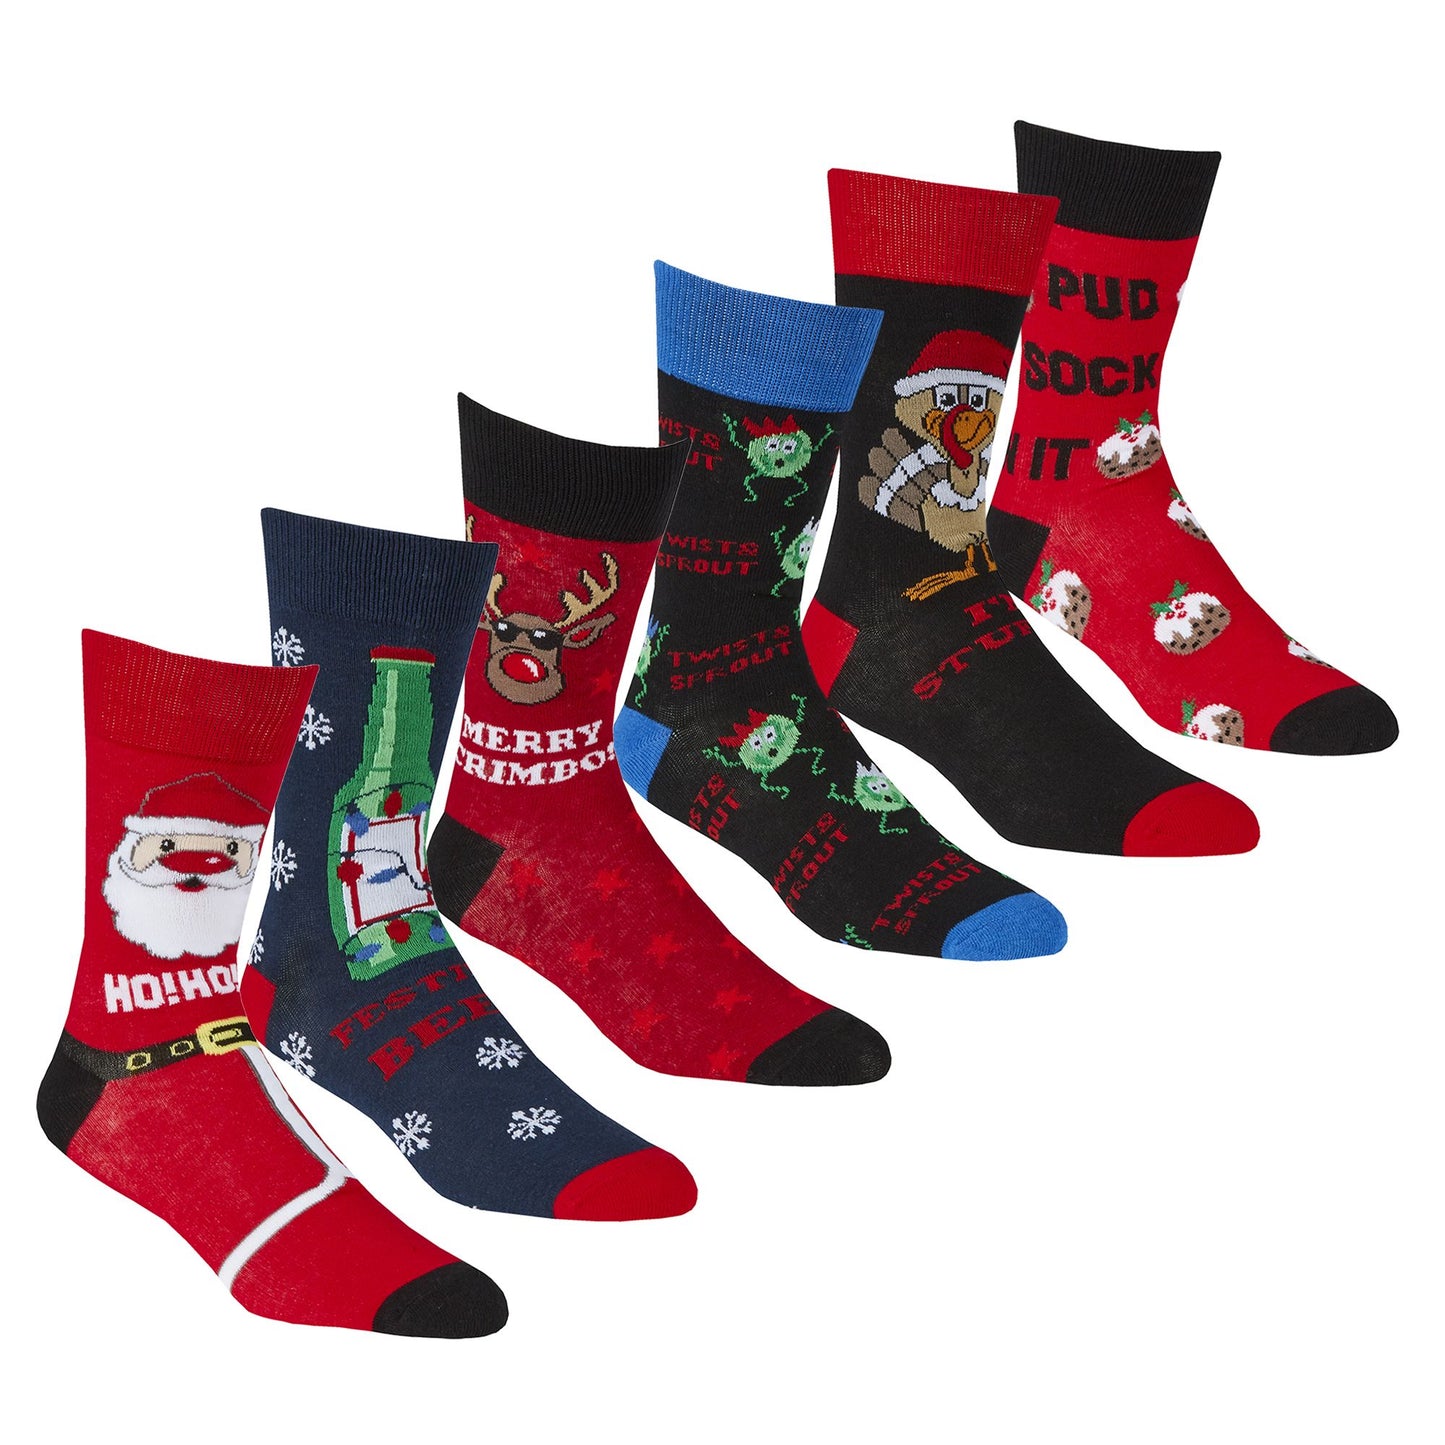 Adults 6 Pairs Christmas Socks on Single Carded Hangers